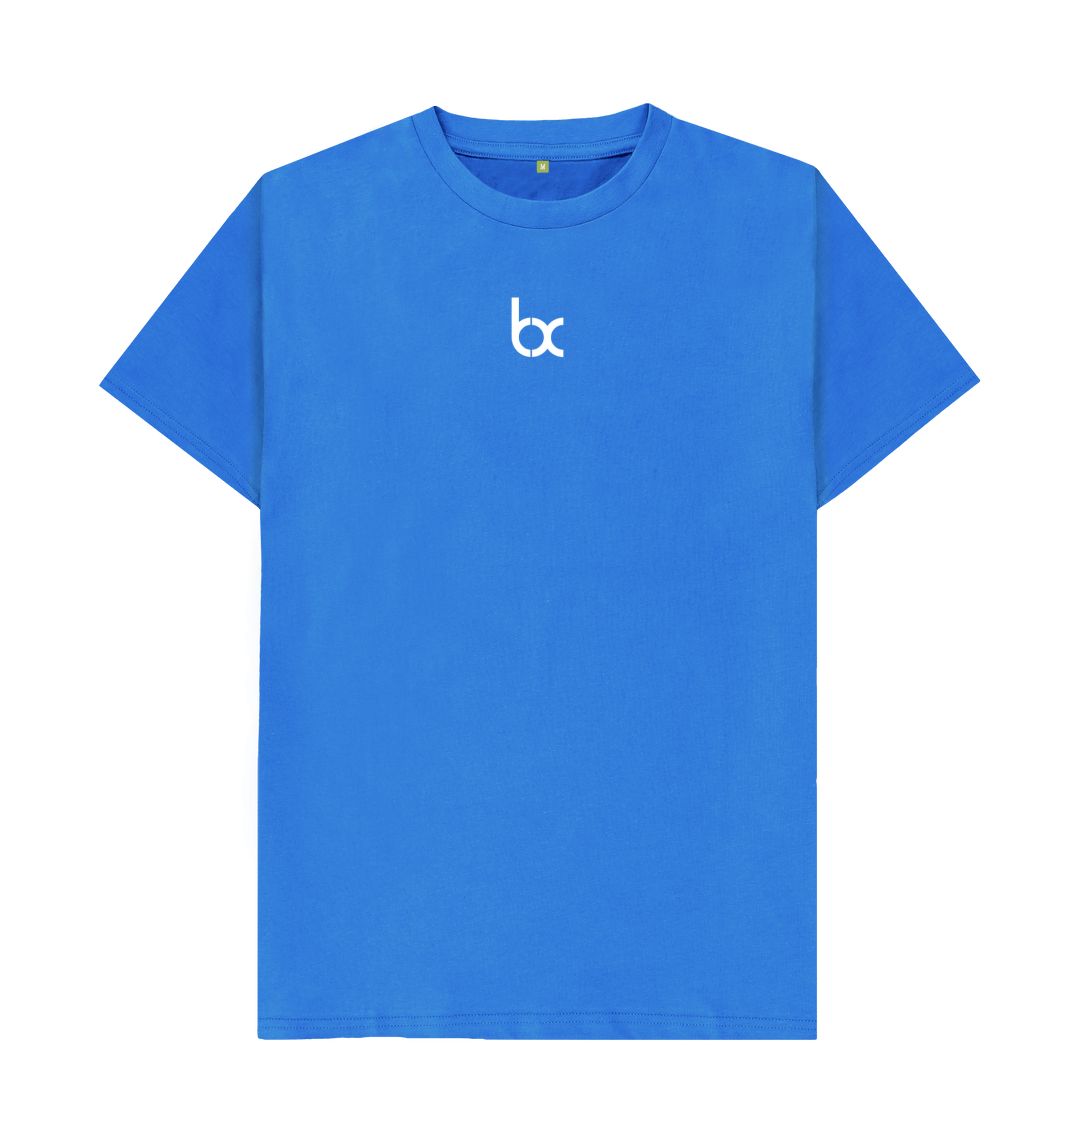 Bright Blue BX Standard Tee with white logo